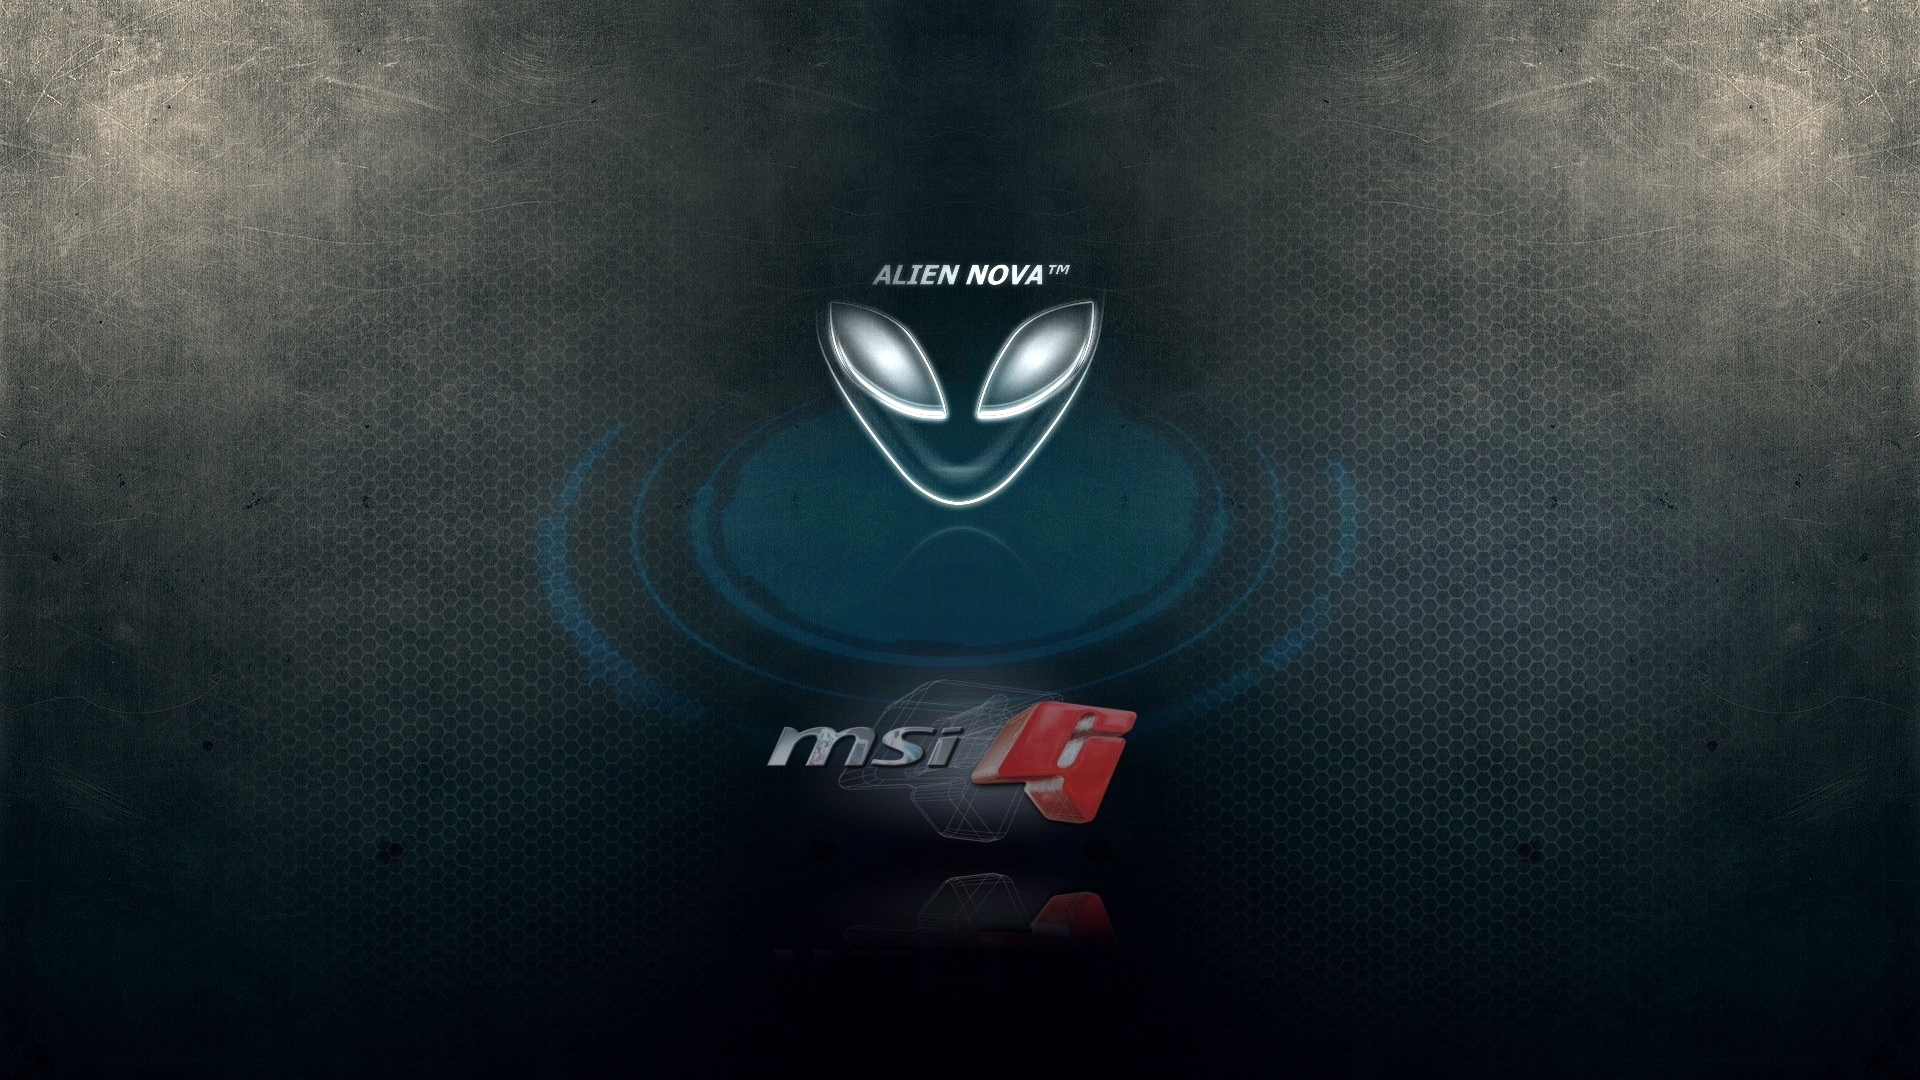 alienware and MSi g logo hd 1920x1080 1080p wallpaper compatible for 1920x1080